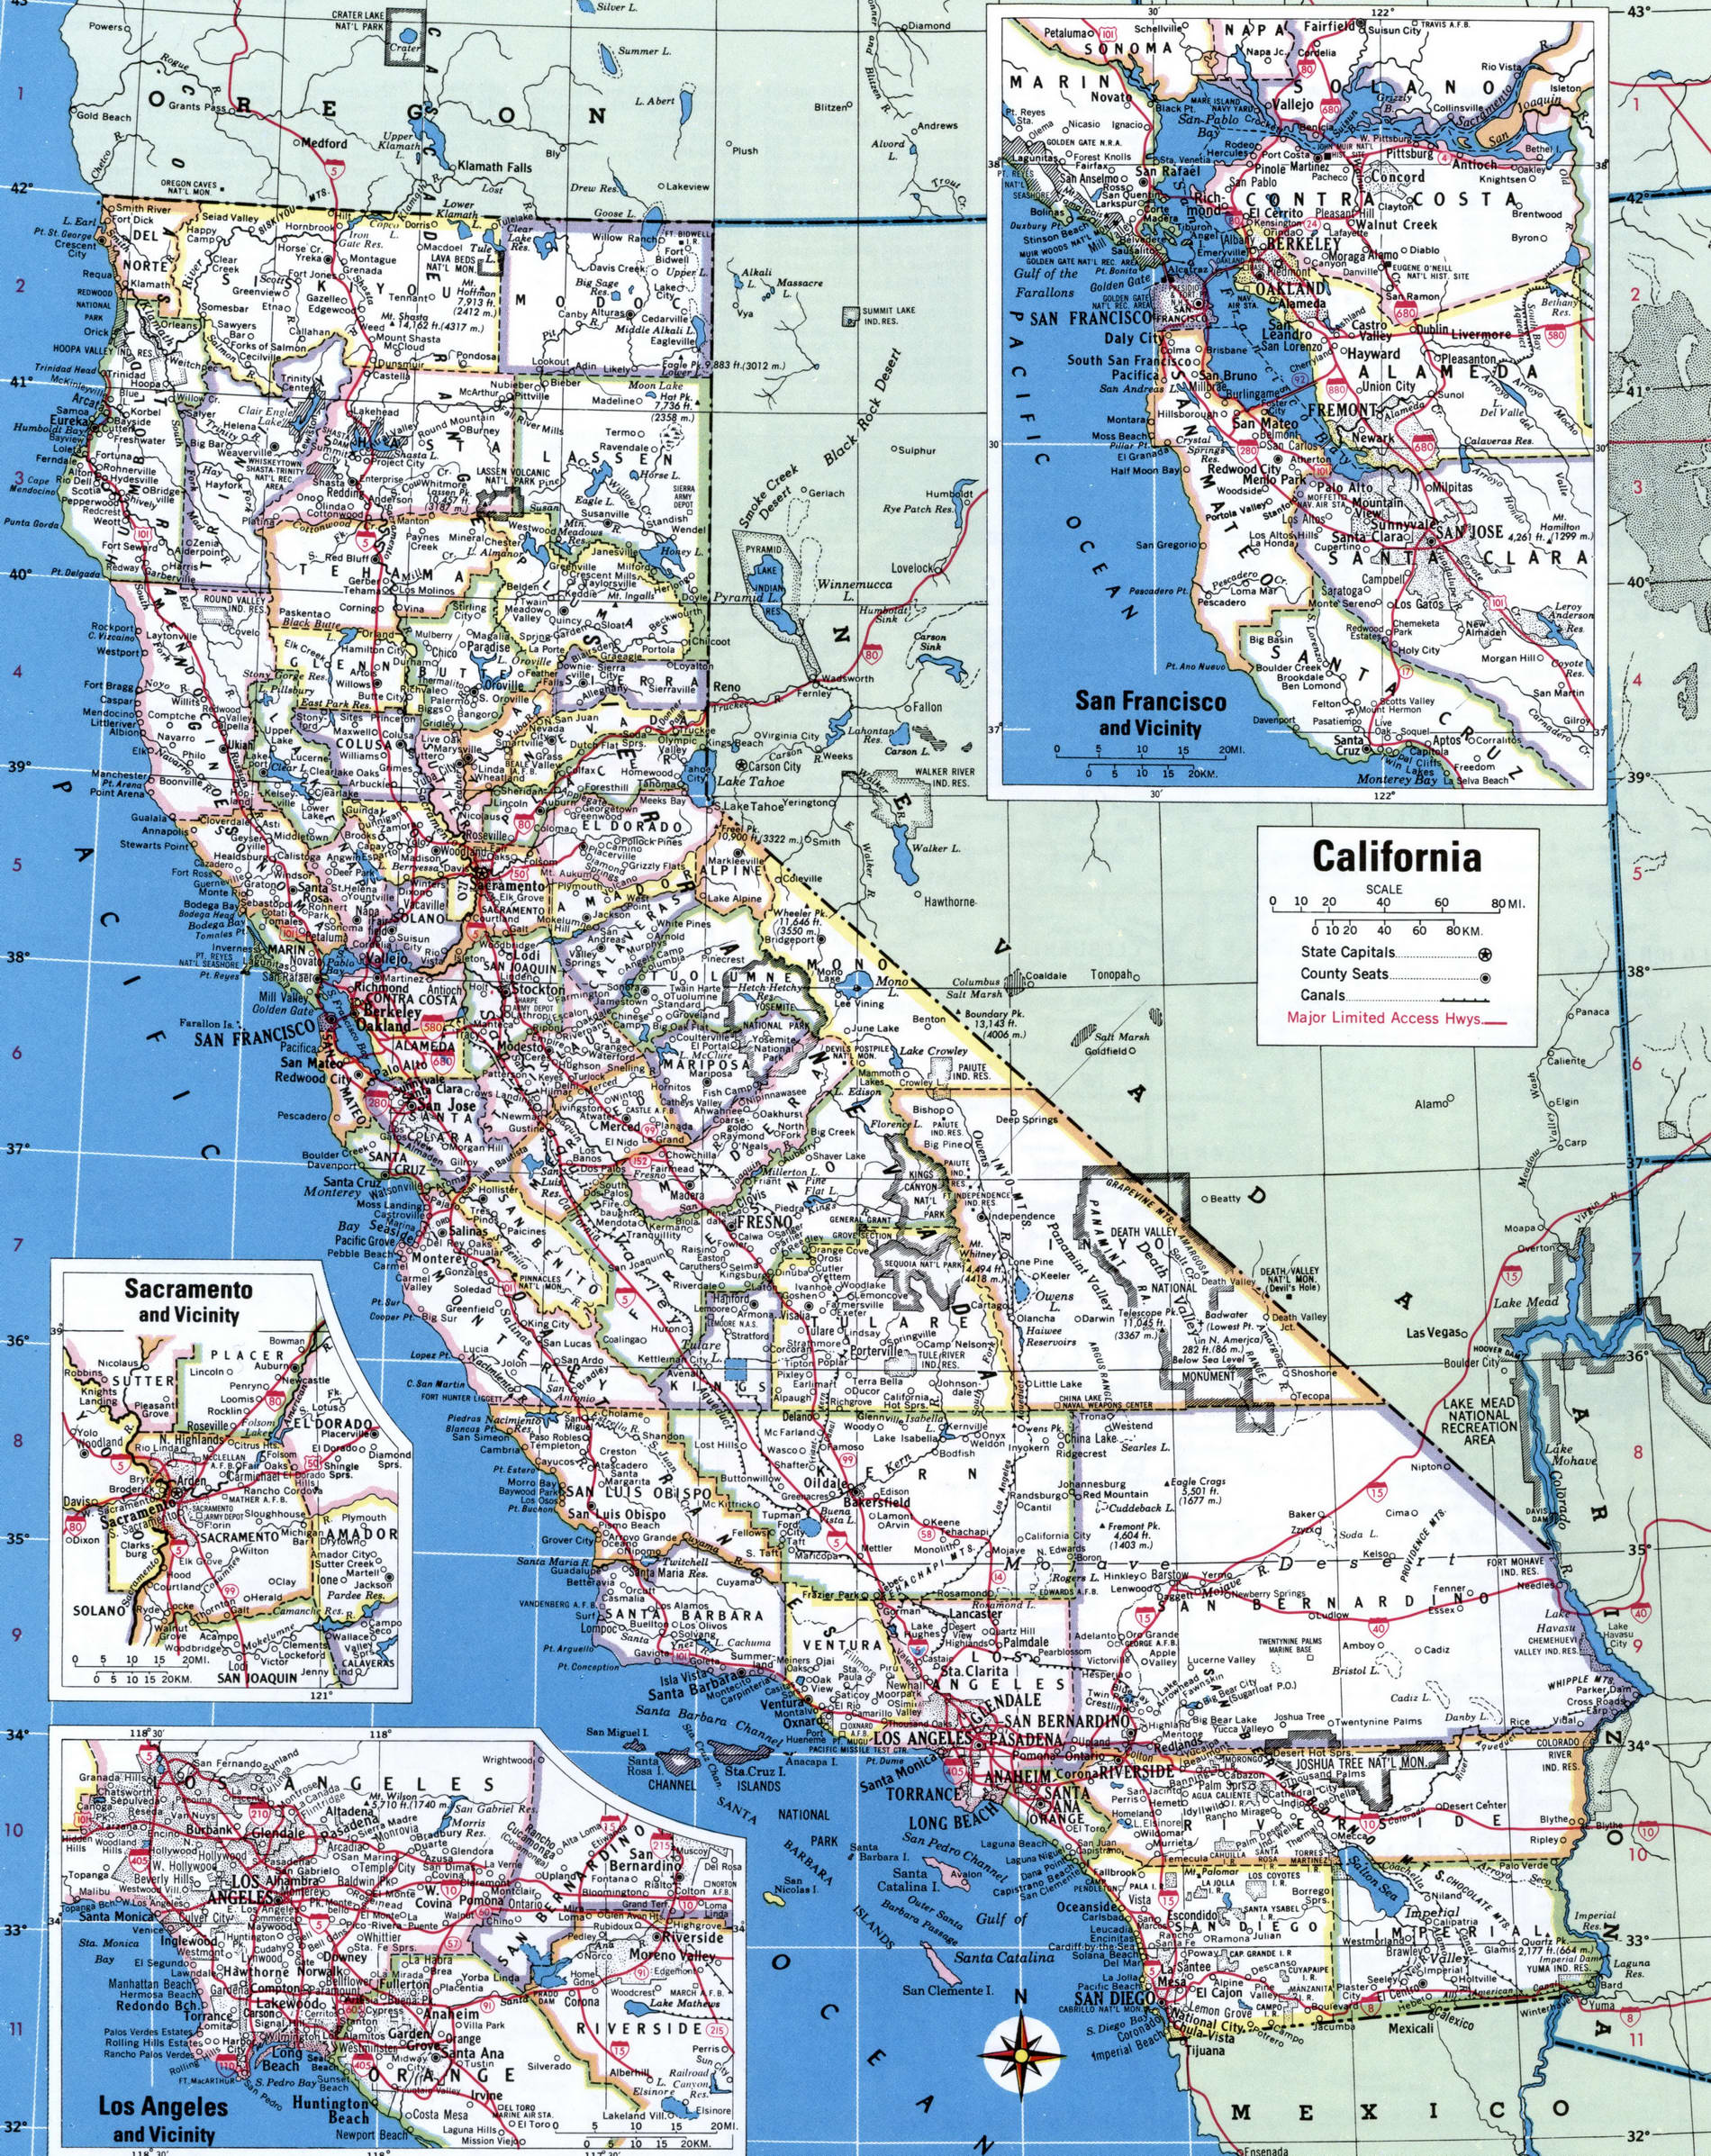 Map of California showing county with cities and road highways